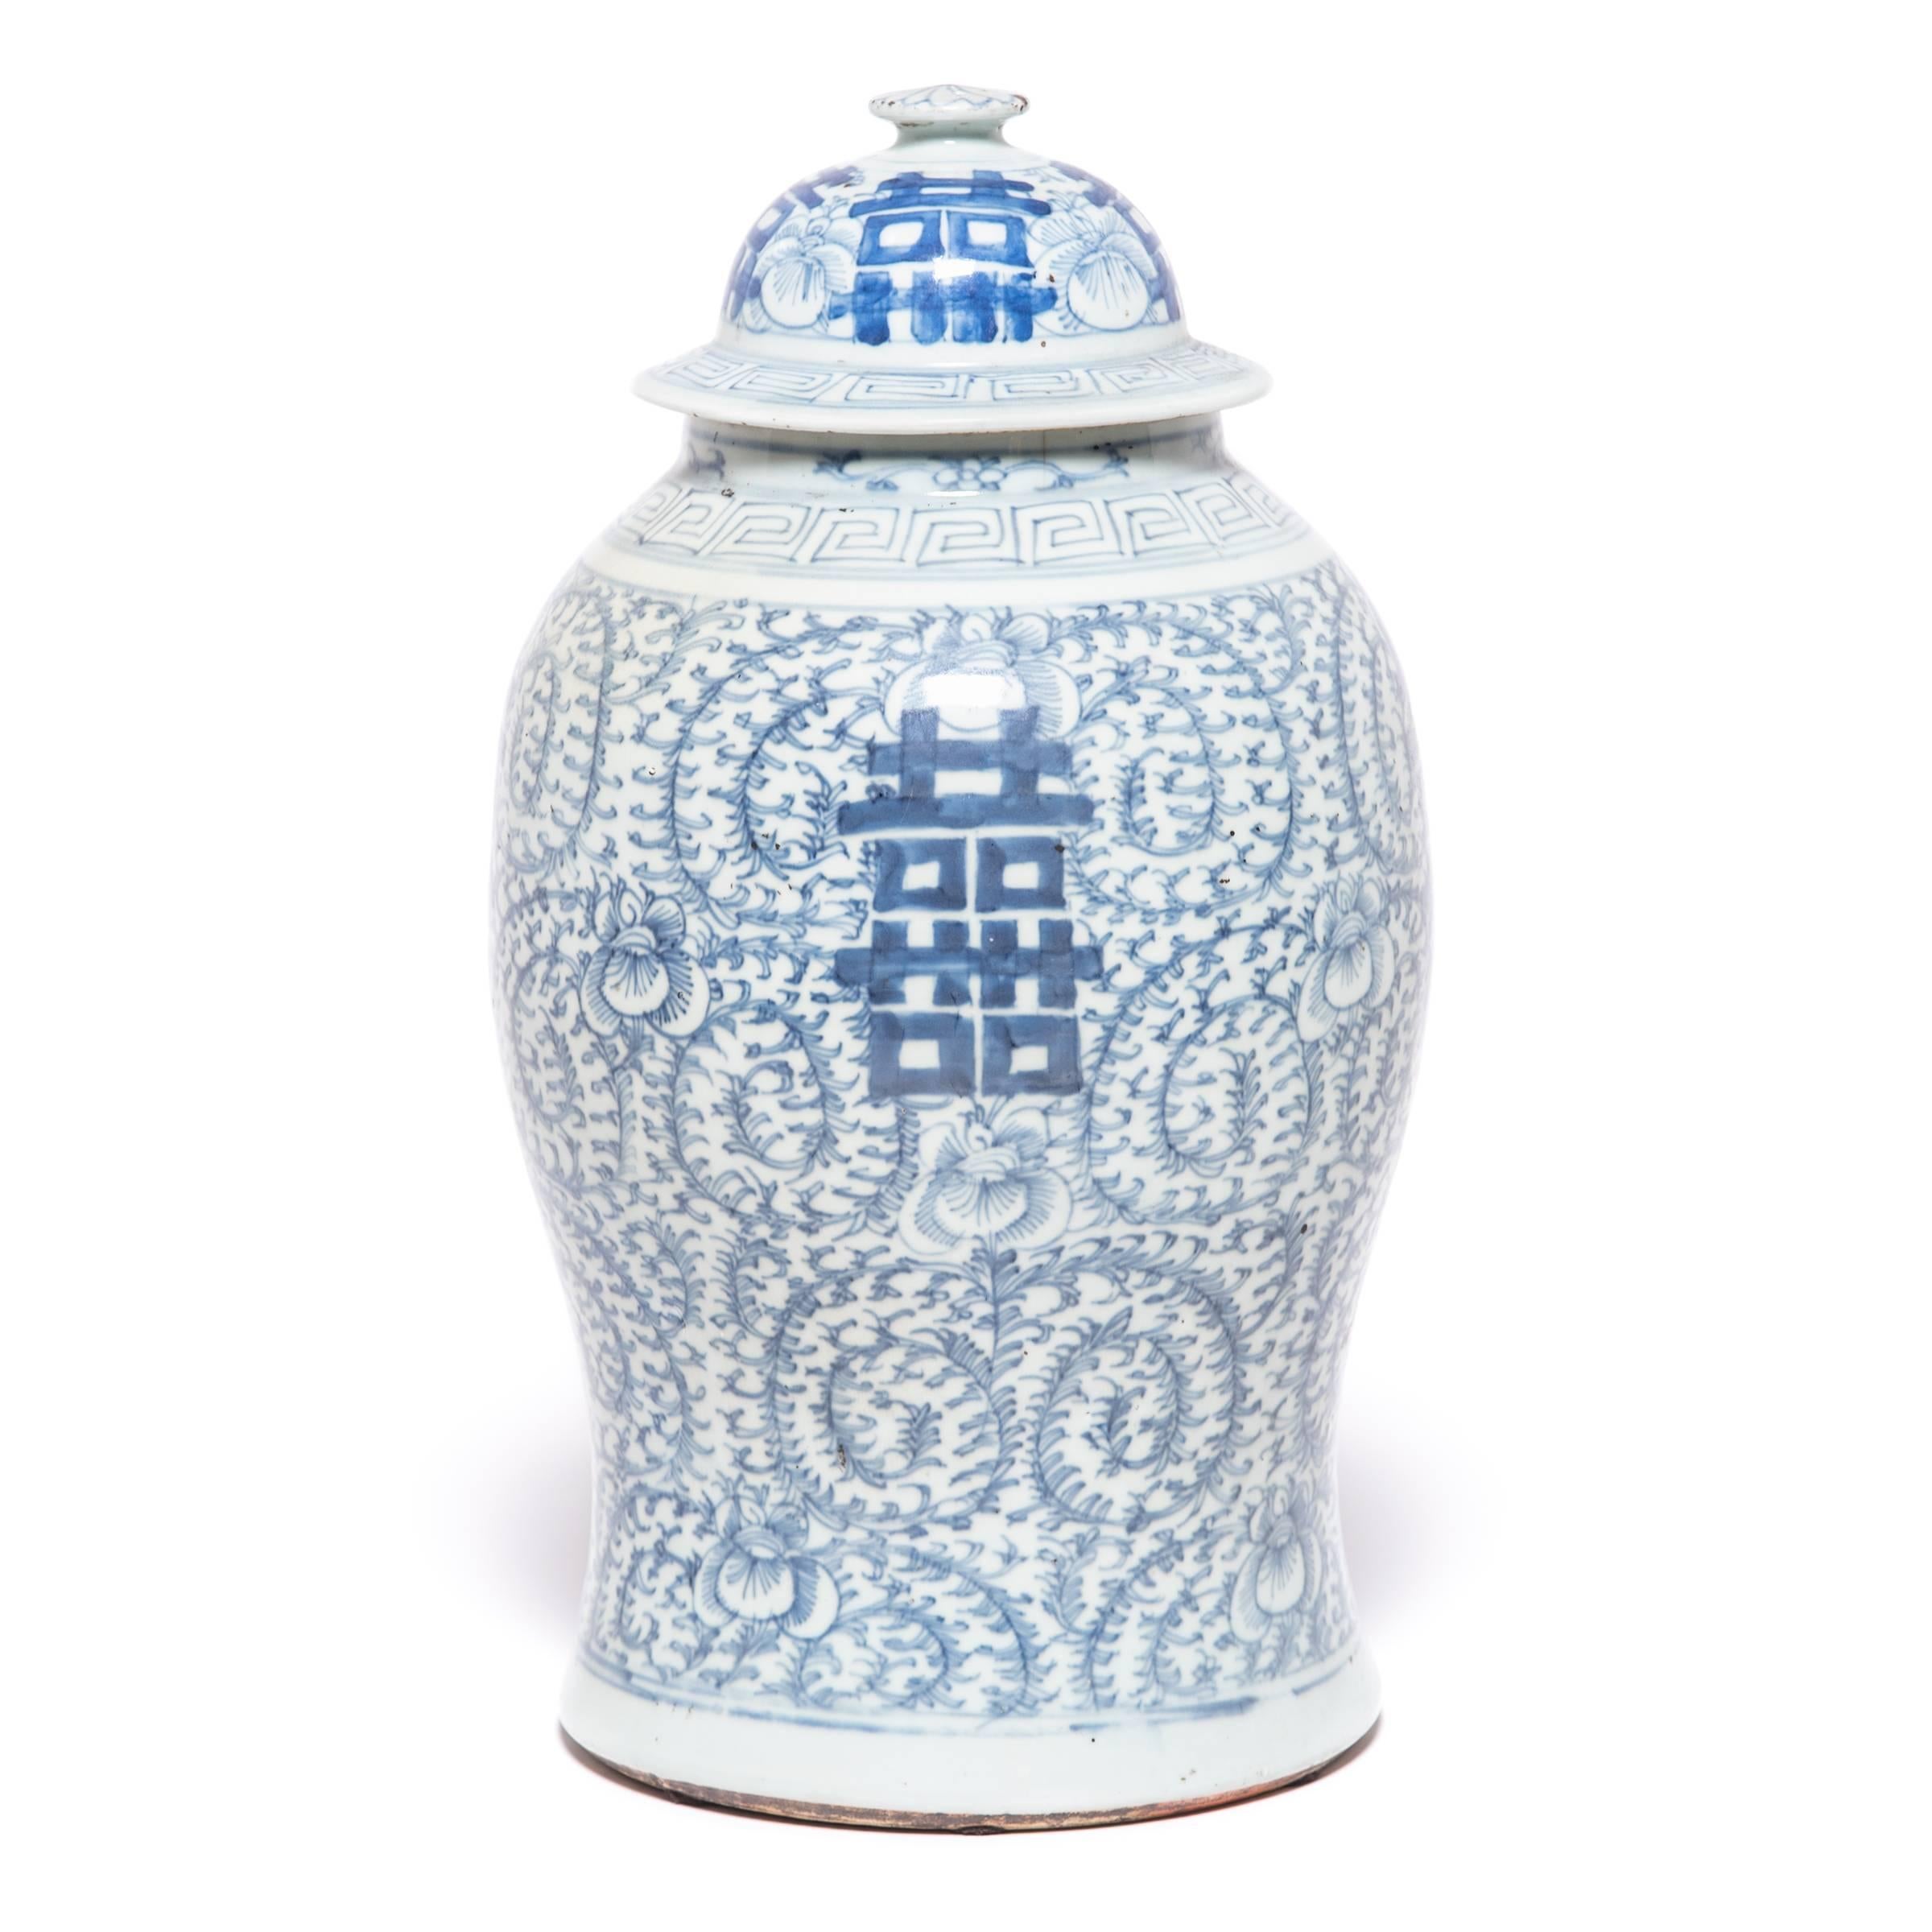 Qing 19th Century Chinese Blue and White Double Happiness Jar